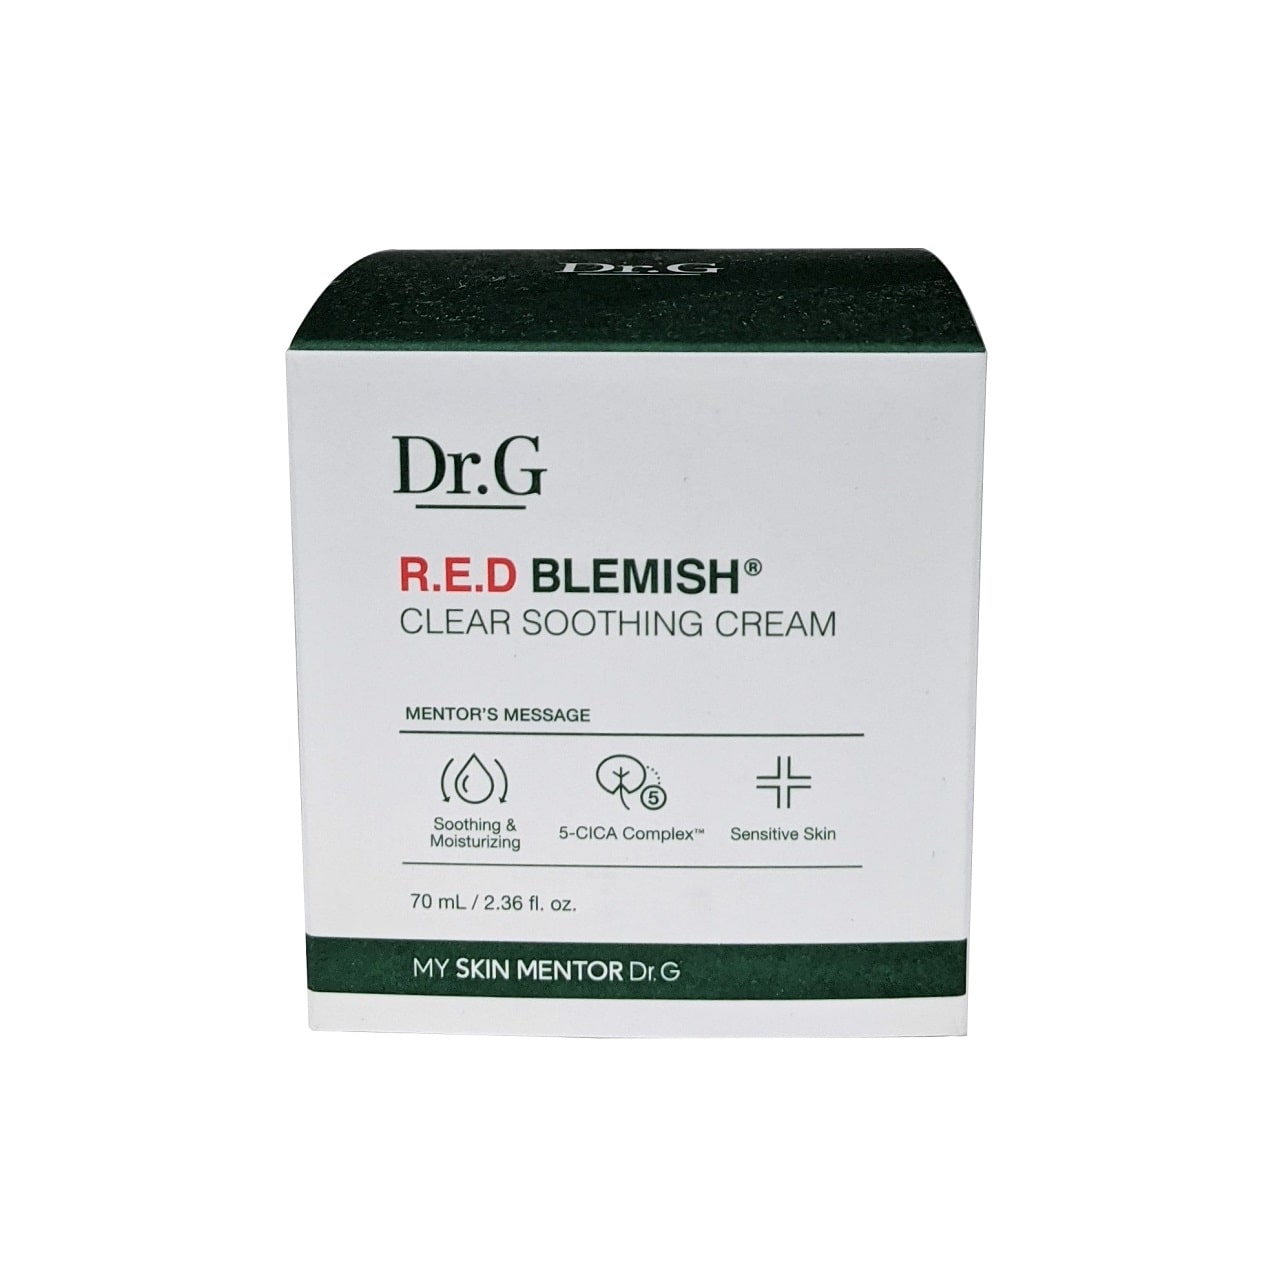 Product label for Dr.G R.E.D Blemish Clear Soothing Cream